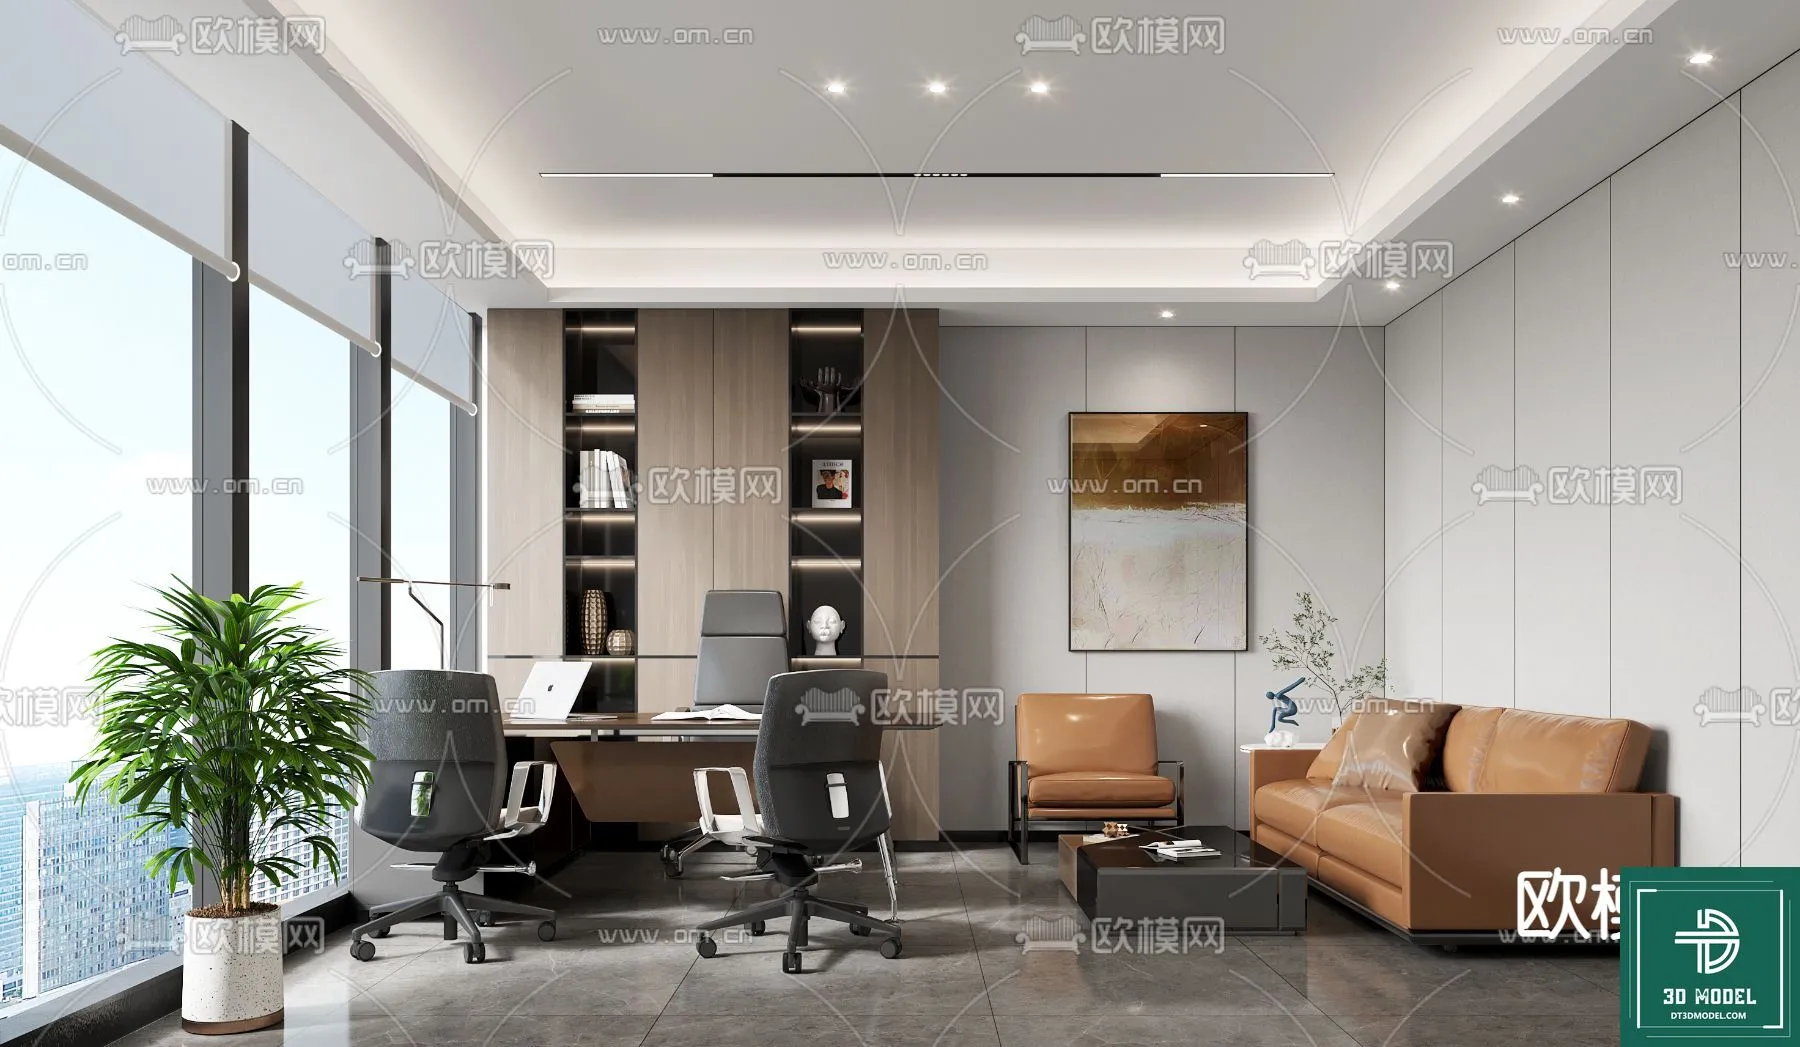 OFFICE ROOM FOR MANAGER – 3DMODEL – 075